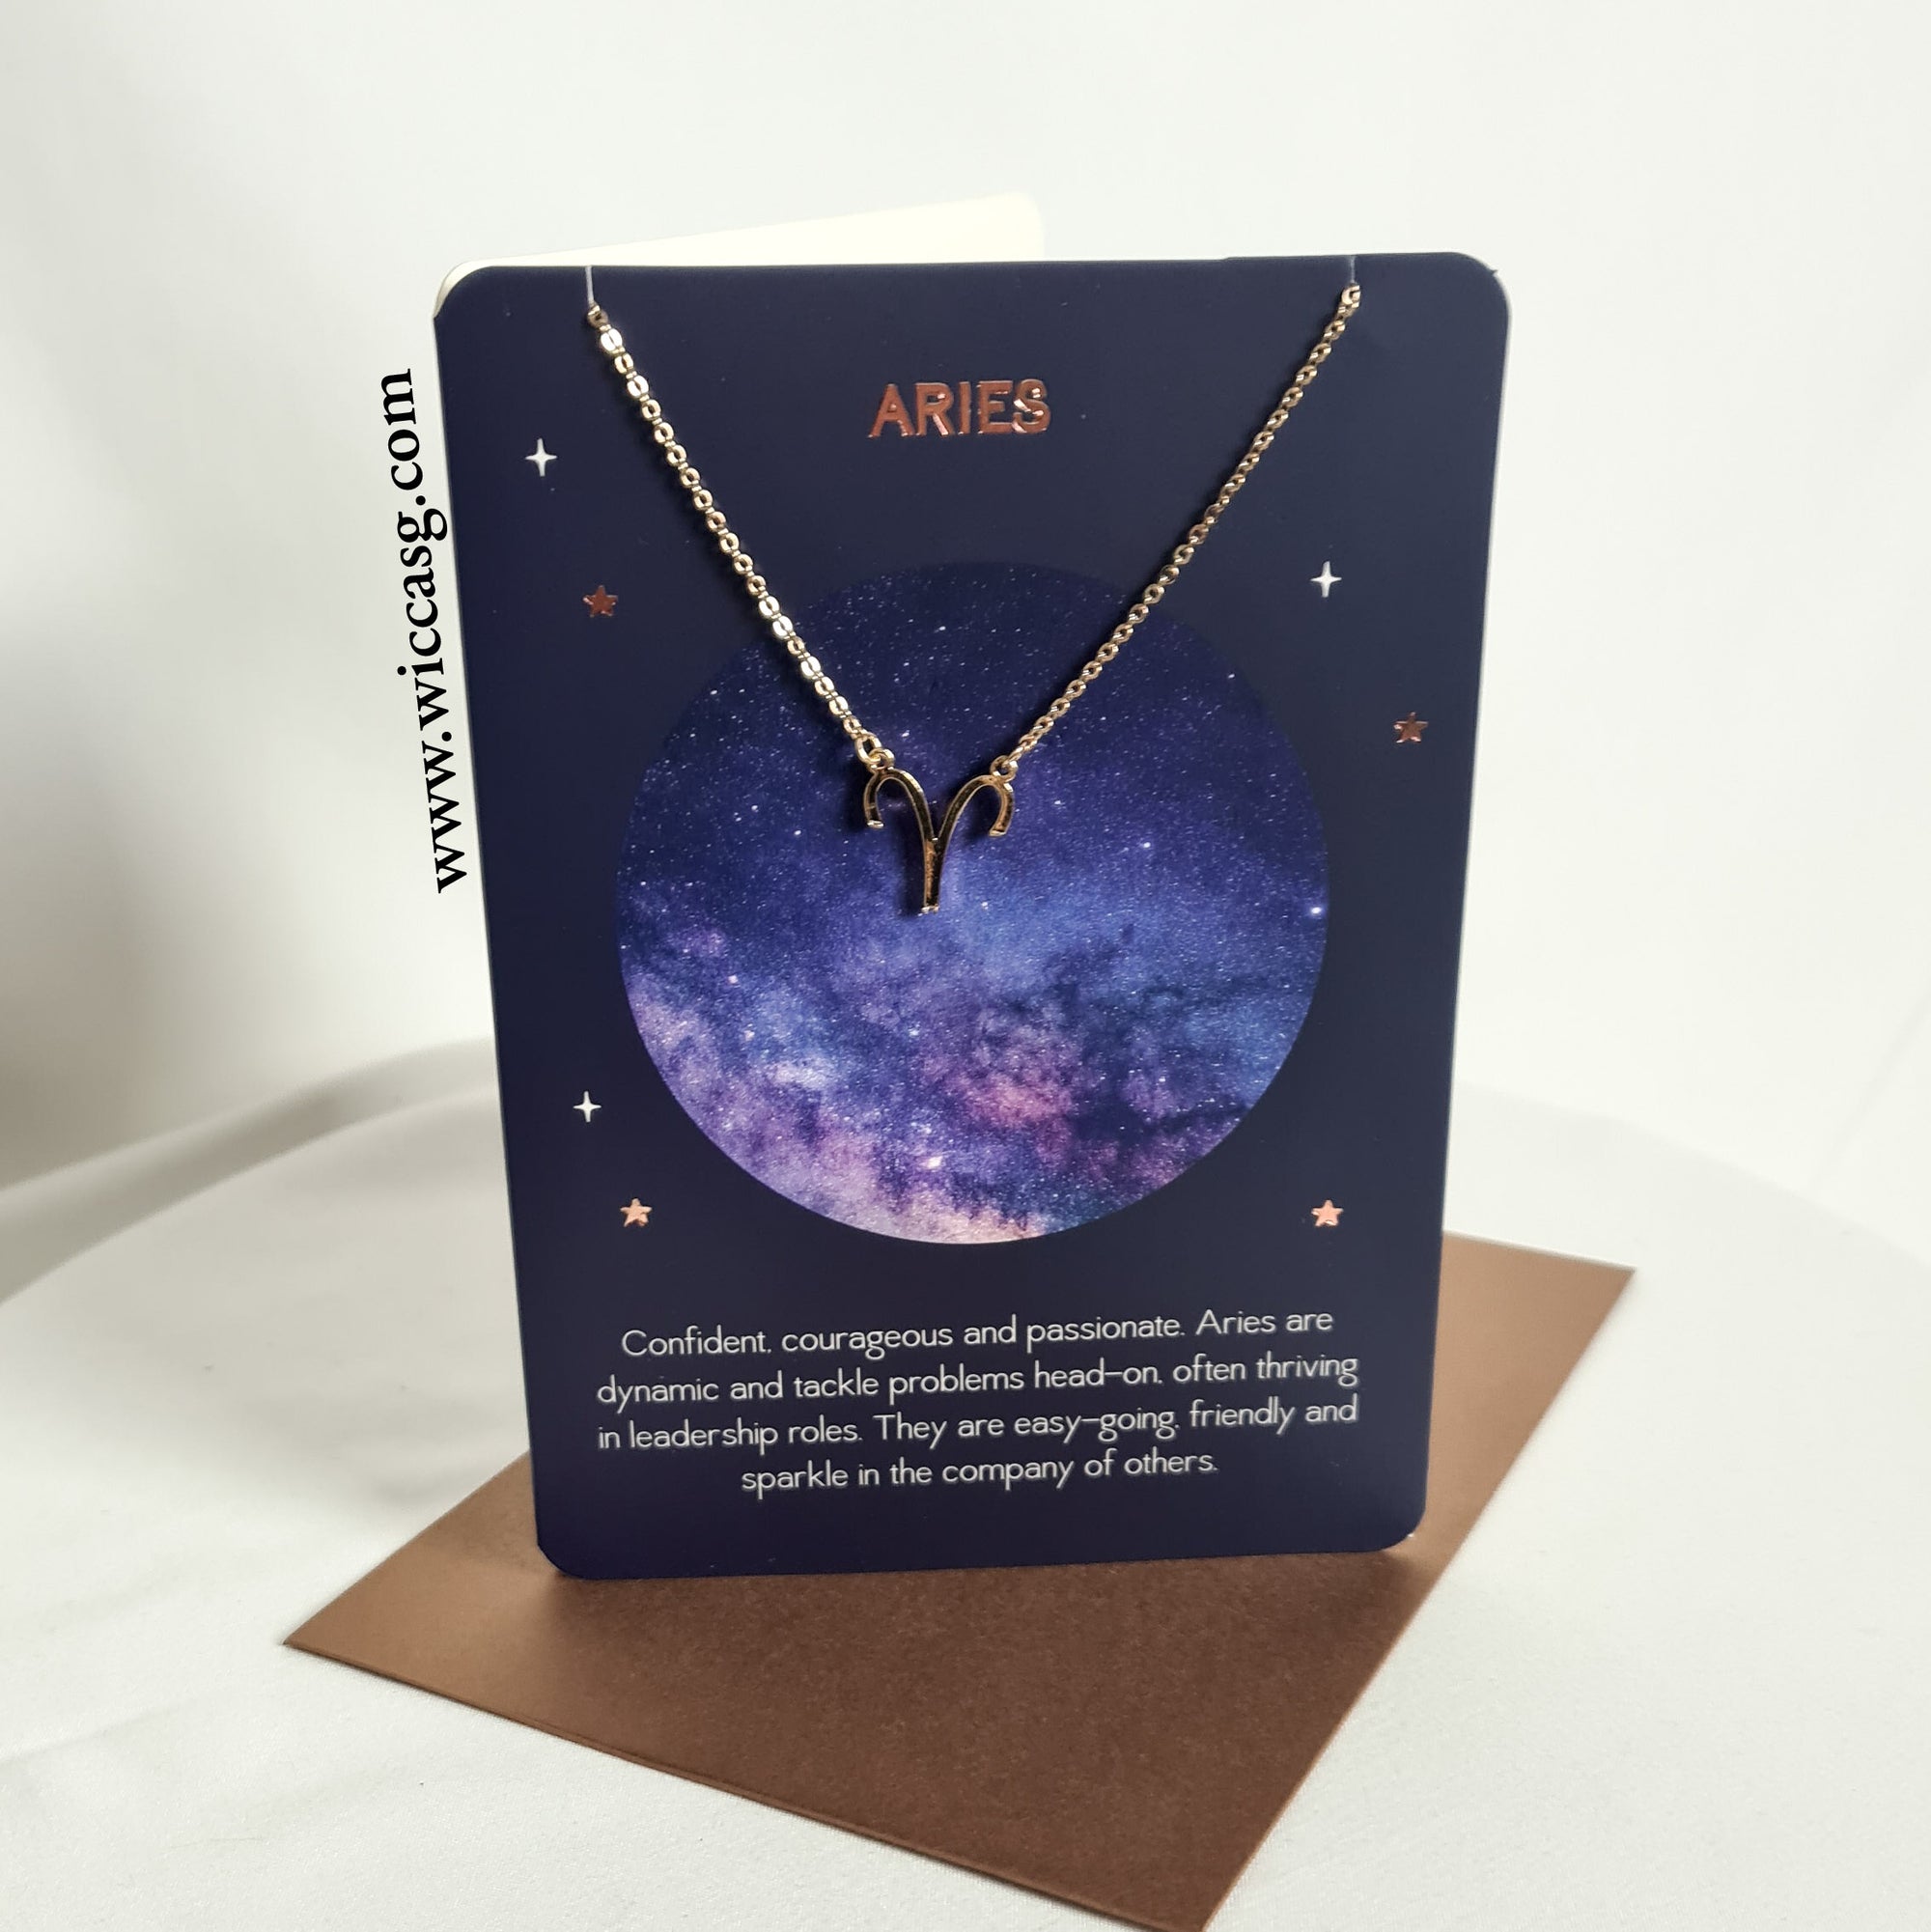 Aries Horoscope (Gold) Necklace